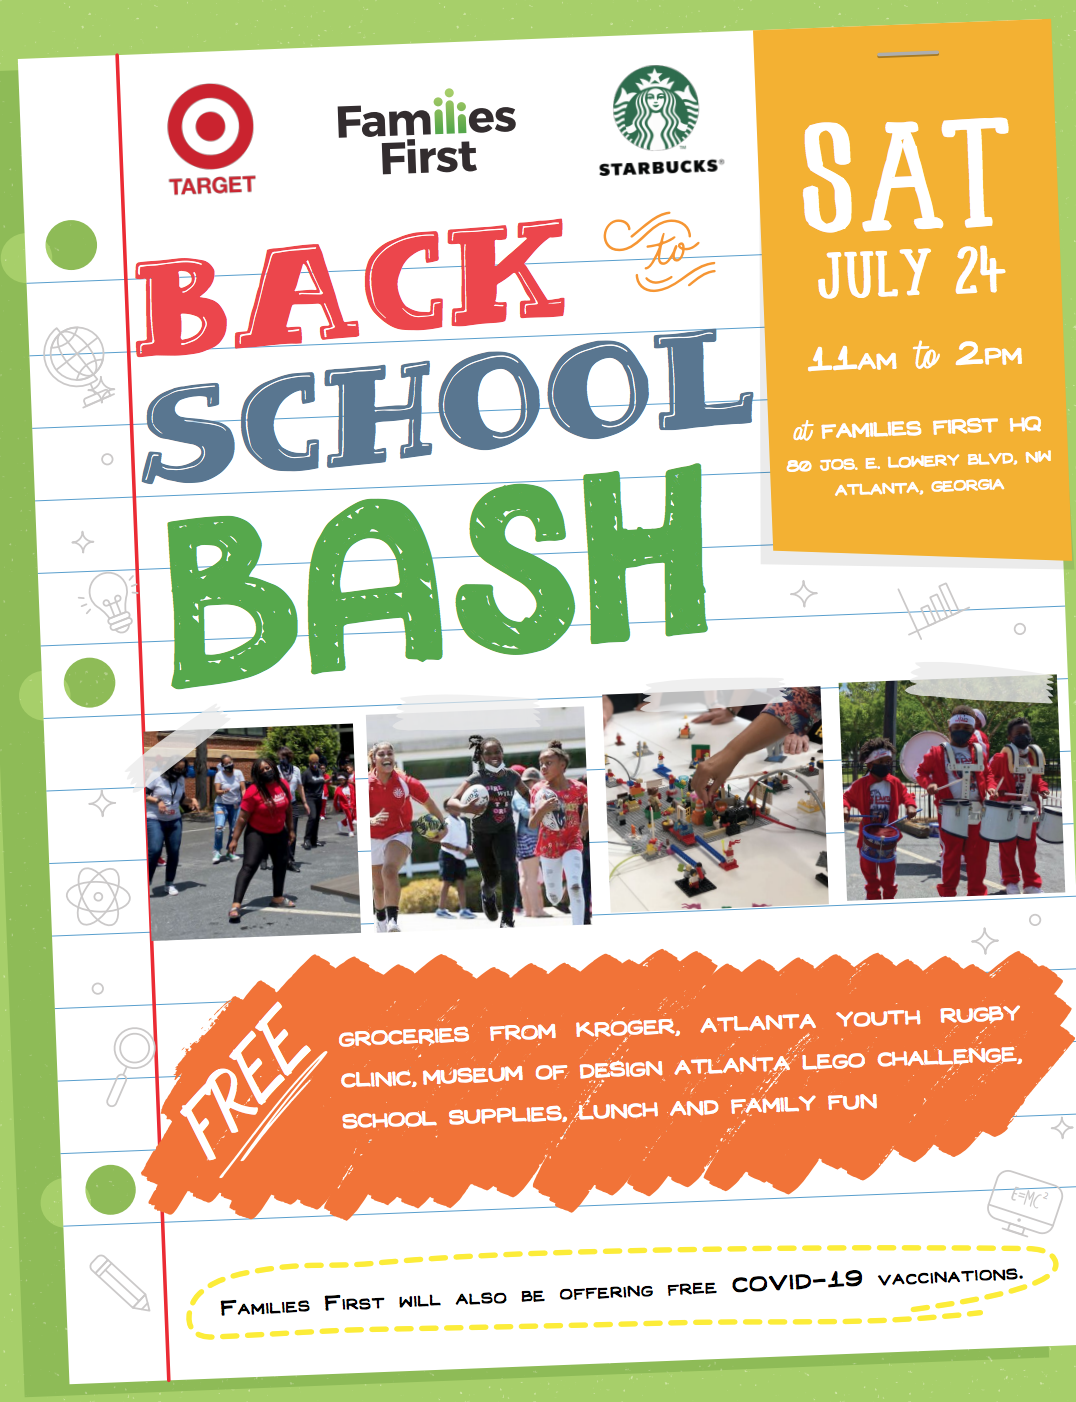 Families First Brings Community Together For Back To School Bash Promoting The Power Of Resilience And Education To Get Families Ready For Back To School Saportareport